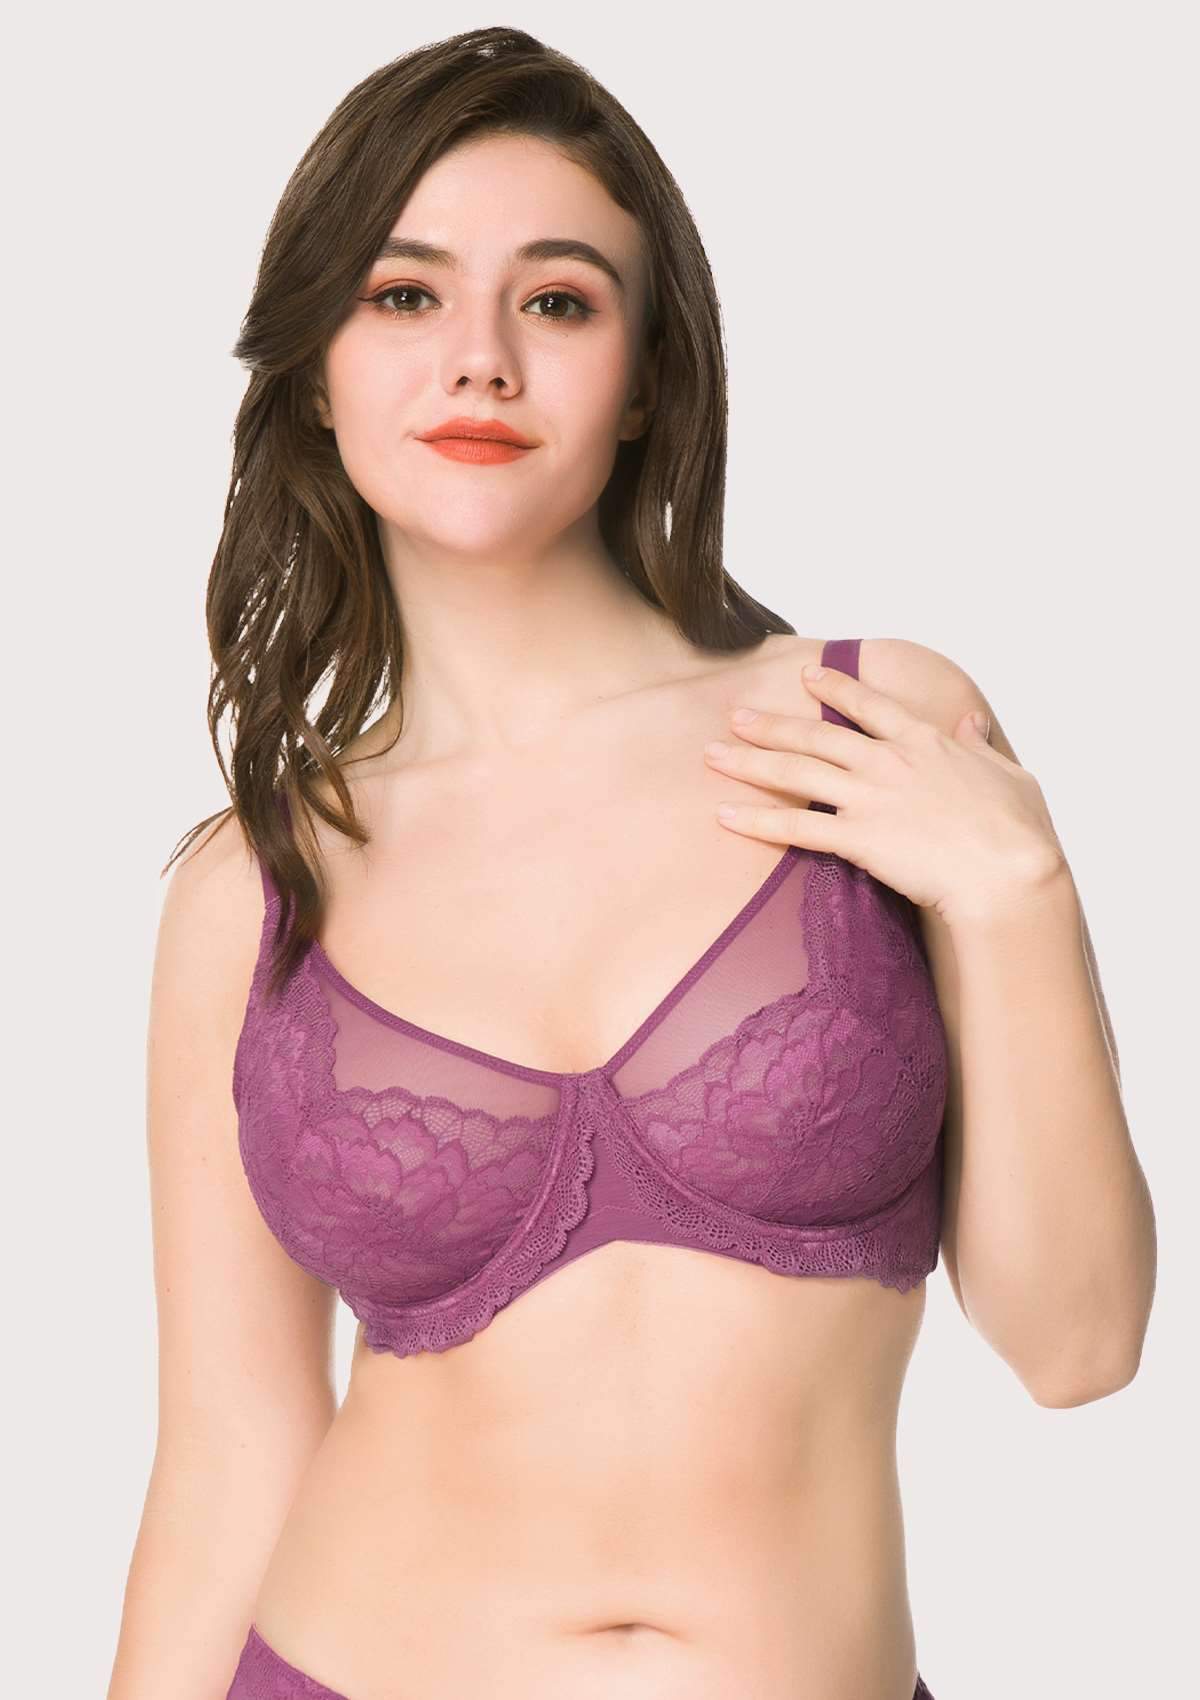 HSIA Paeonia Lace Full Coverage Underwire Non-Padded Uplifting Bra - Purple / 40 / D